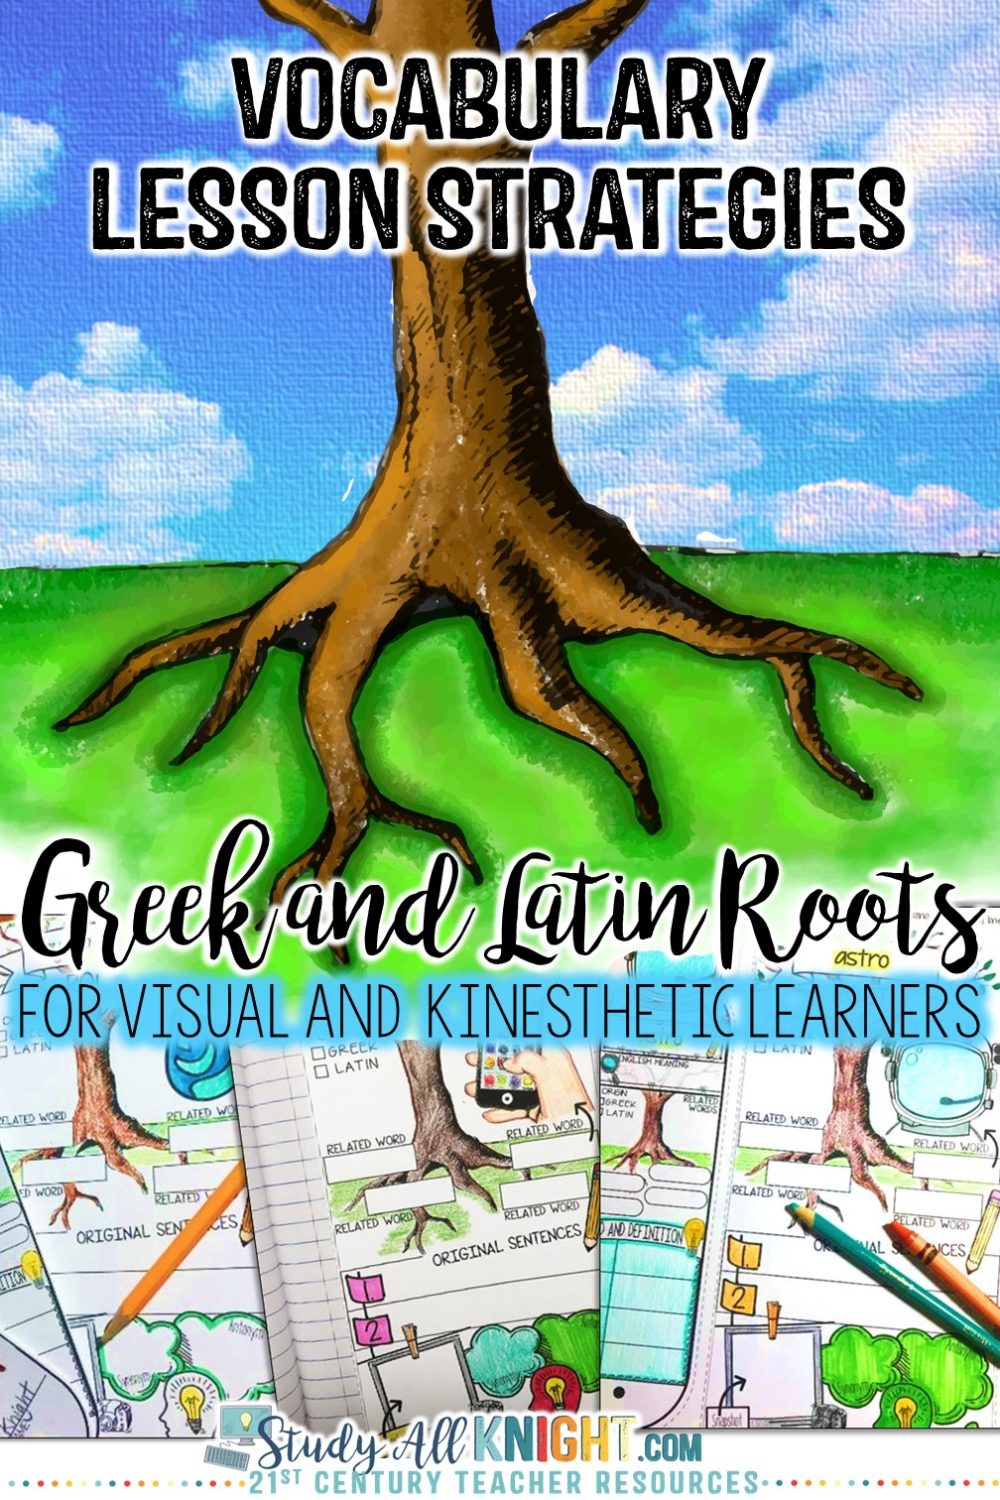 Greek and Latin Roots all school year long! Greek and Latin roots are the foundation of building vocabulary. Why not make it fun!  I found a way to reinforce Greek and Latin Roots vocabulary lessons. If you are into visual notebooks, there are sketch notes. If you are looking for a kinesthetic component, then your students will love compiling their interactive fan. And, for our paperless classrooms, it's easy to share the digital notebook version. #greekandlatinroots #vocabularylessons #sketchnotes 